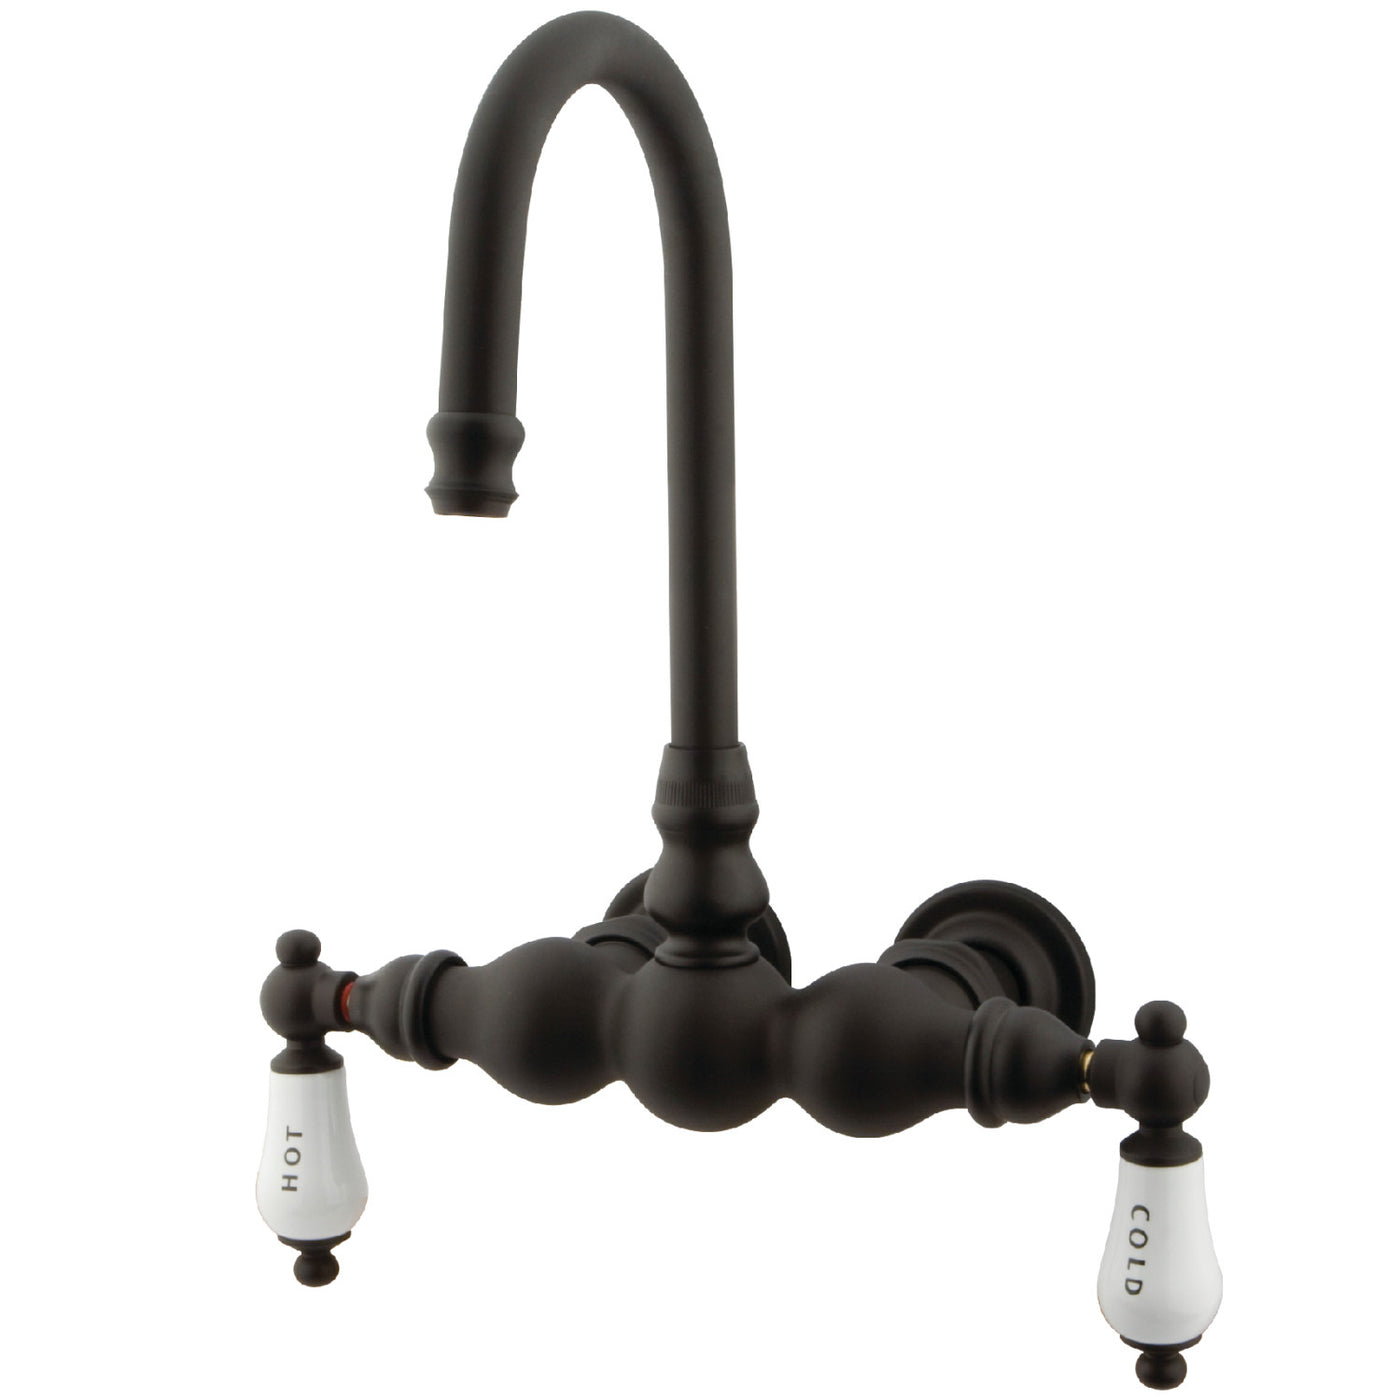 Elements of Design DT0015CL 3-3/8-Inch Wall Mount Tub Faucet, Oil Rubbed Bronze